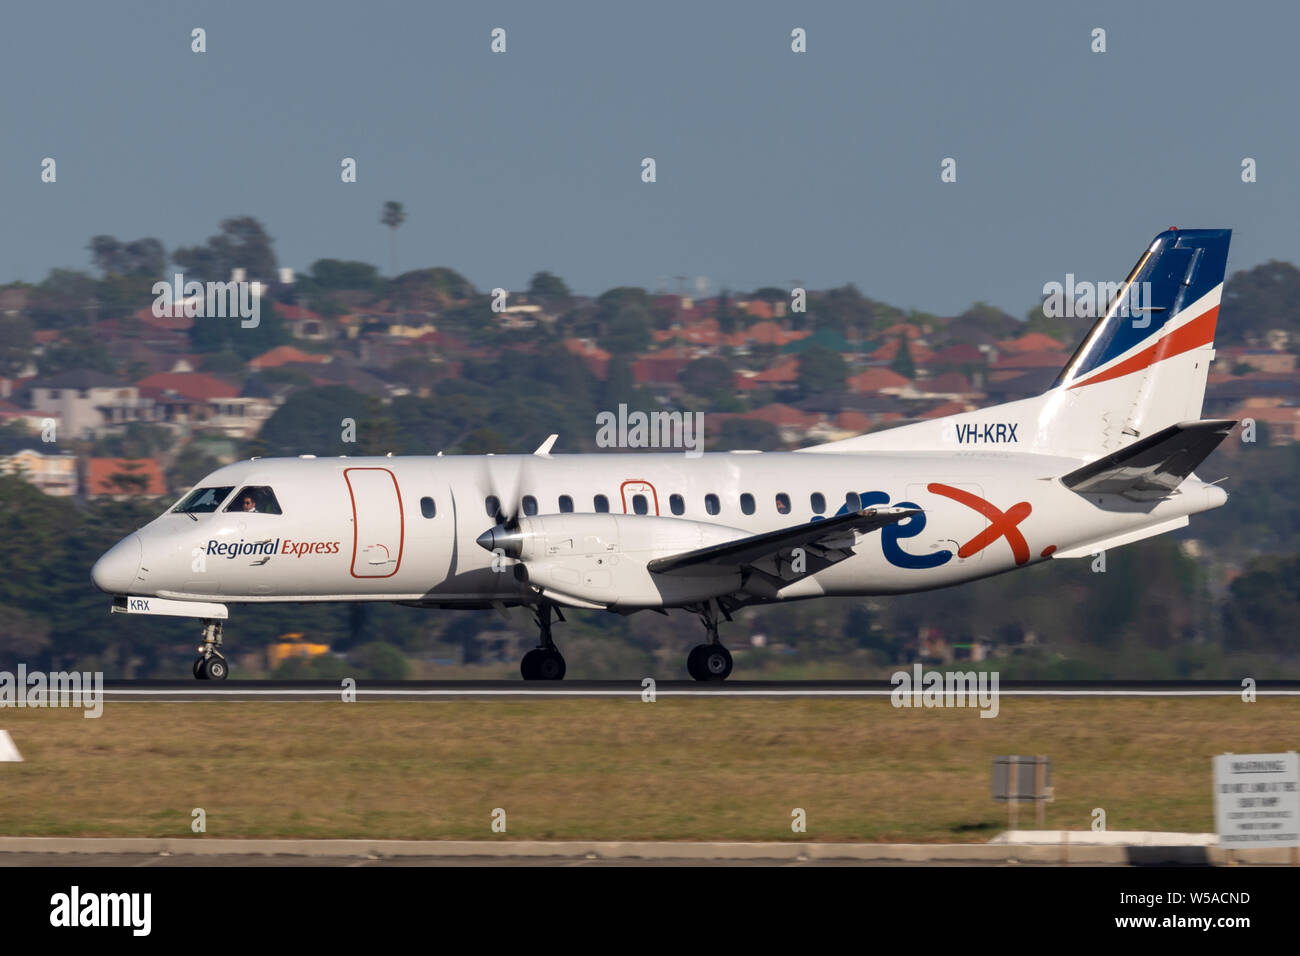 REX (Regional Express Airlines) Saab 340 twin engined regional commuter aircraft taking off from Sydney Airport. Stock Photo